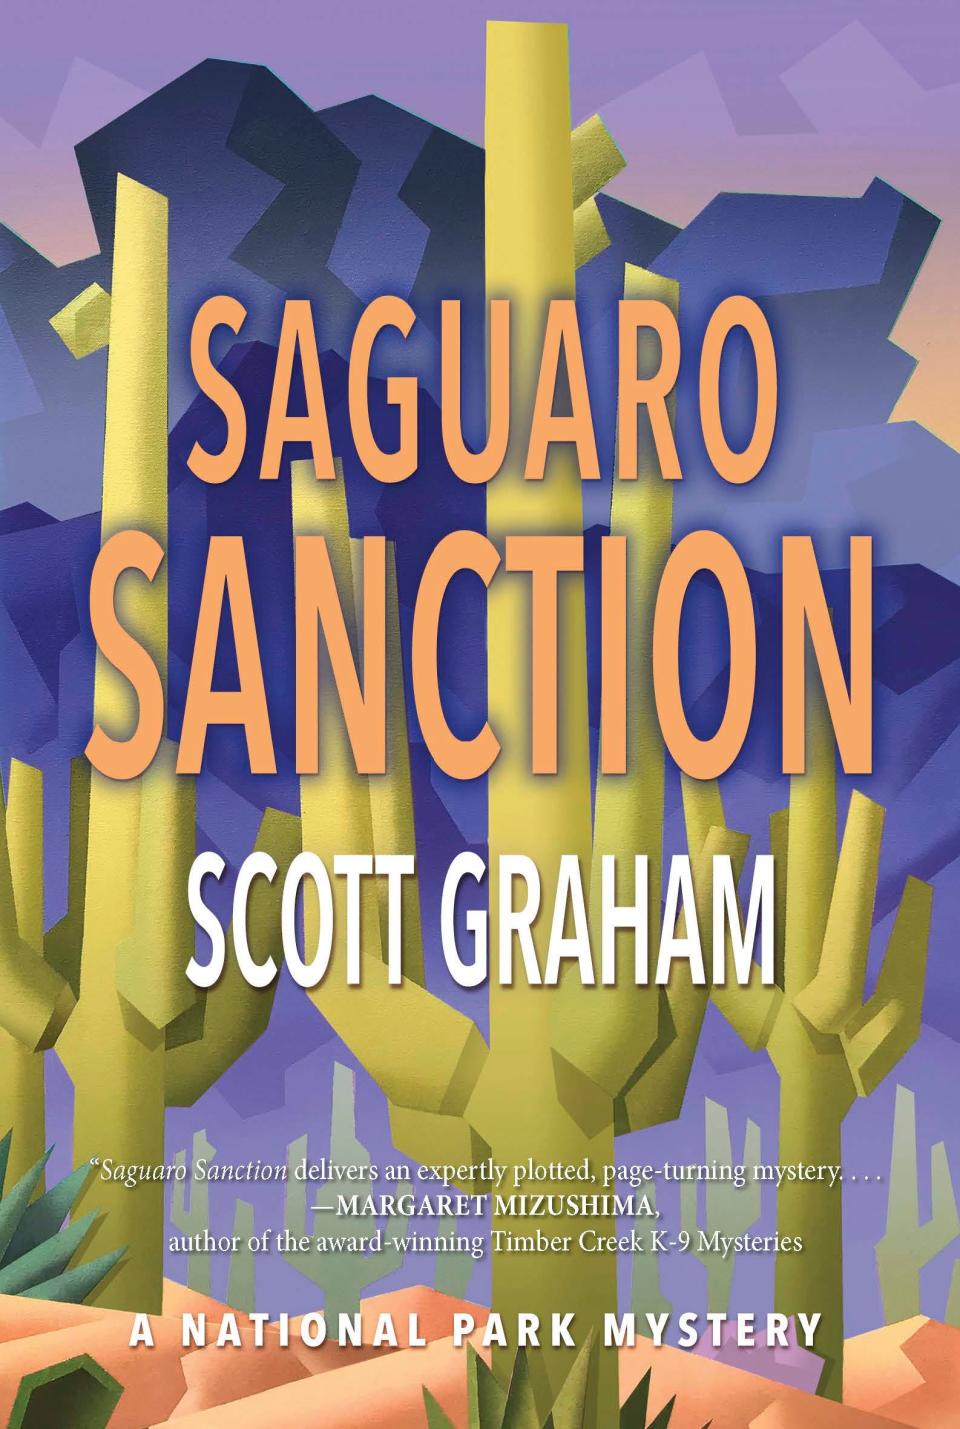 Author Scott Graham will sign copies of his new mystery novel "Saguaro Sanction" from 1 to 3 p.m. Saturday, March 18 at Amy's Bookcase in Farmington.